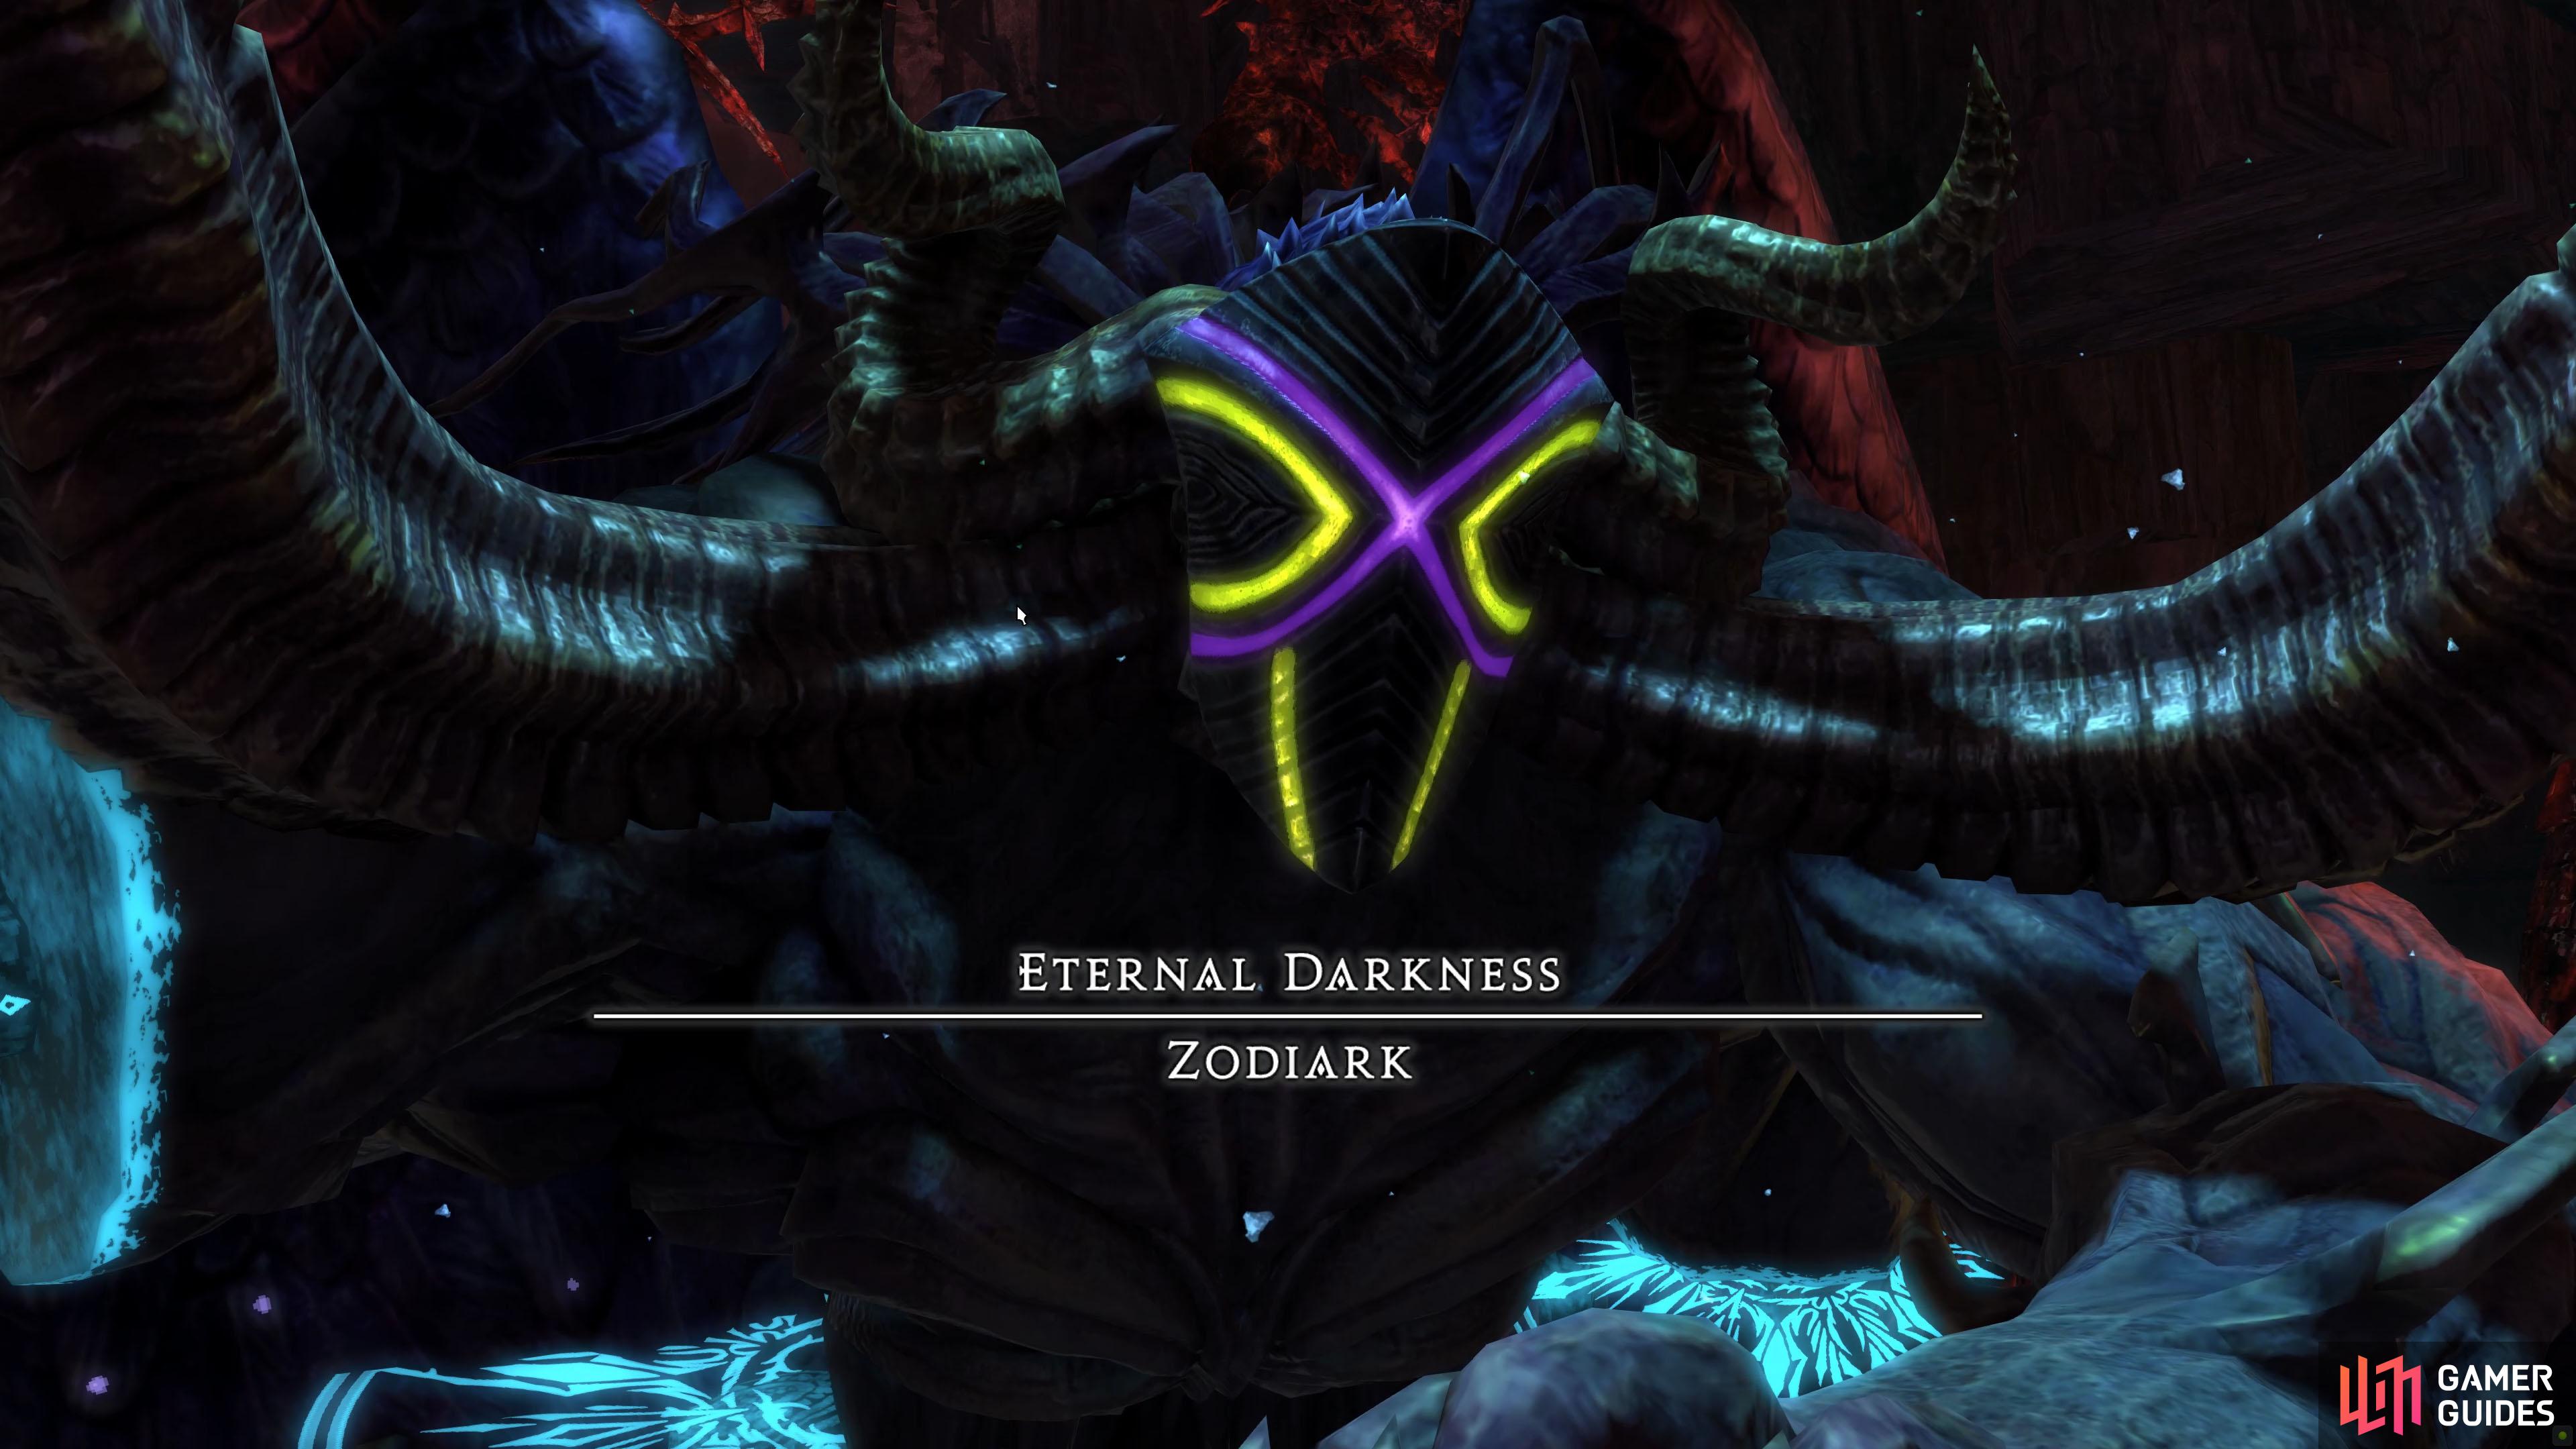 You’ll need to defeat Zodiark in the Extreme Trial to get a chance at looting the Lynx of Eternal Darkness.